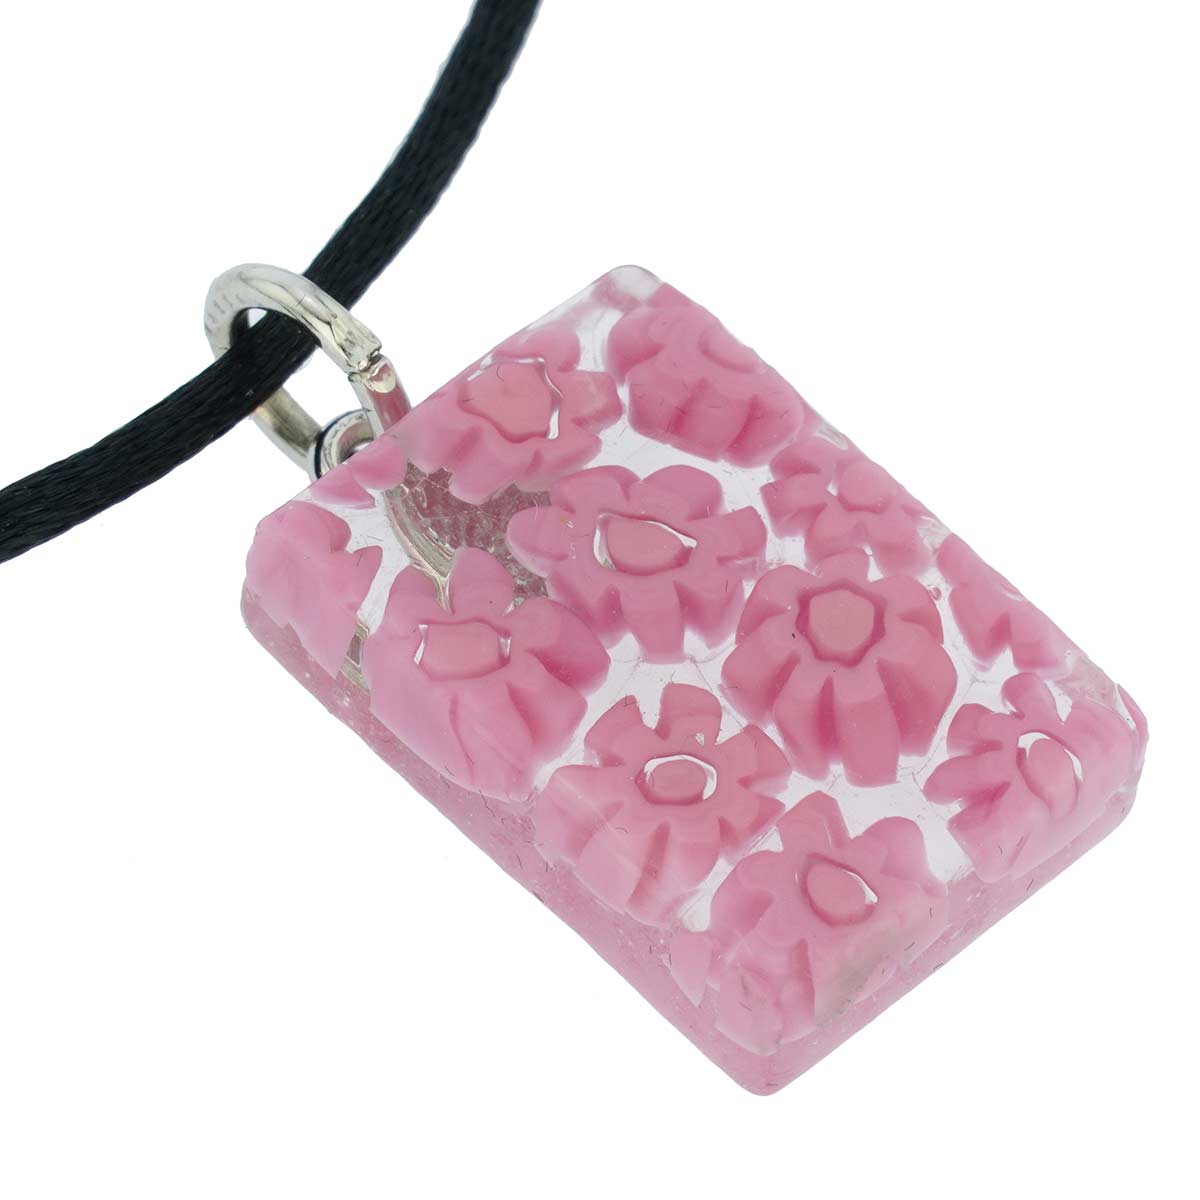 Murano Glass Millefiori Necklace and Earrings Set - Pink